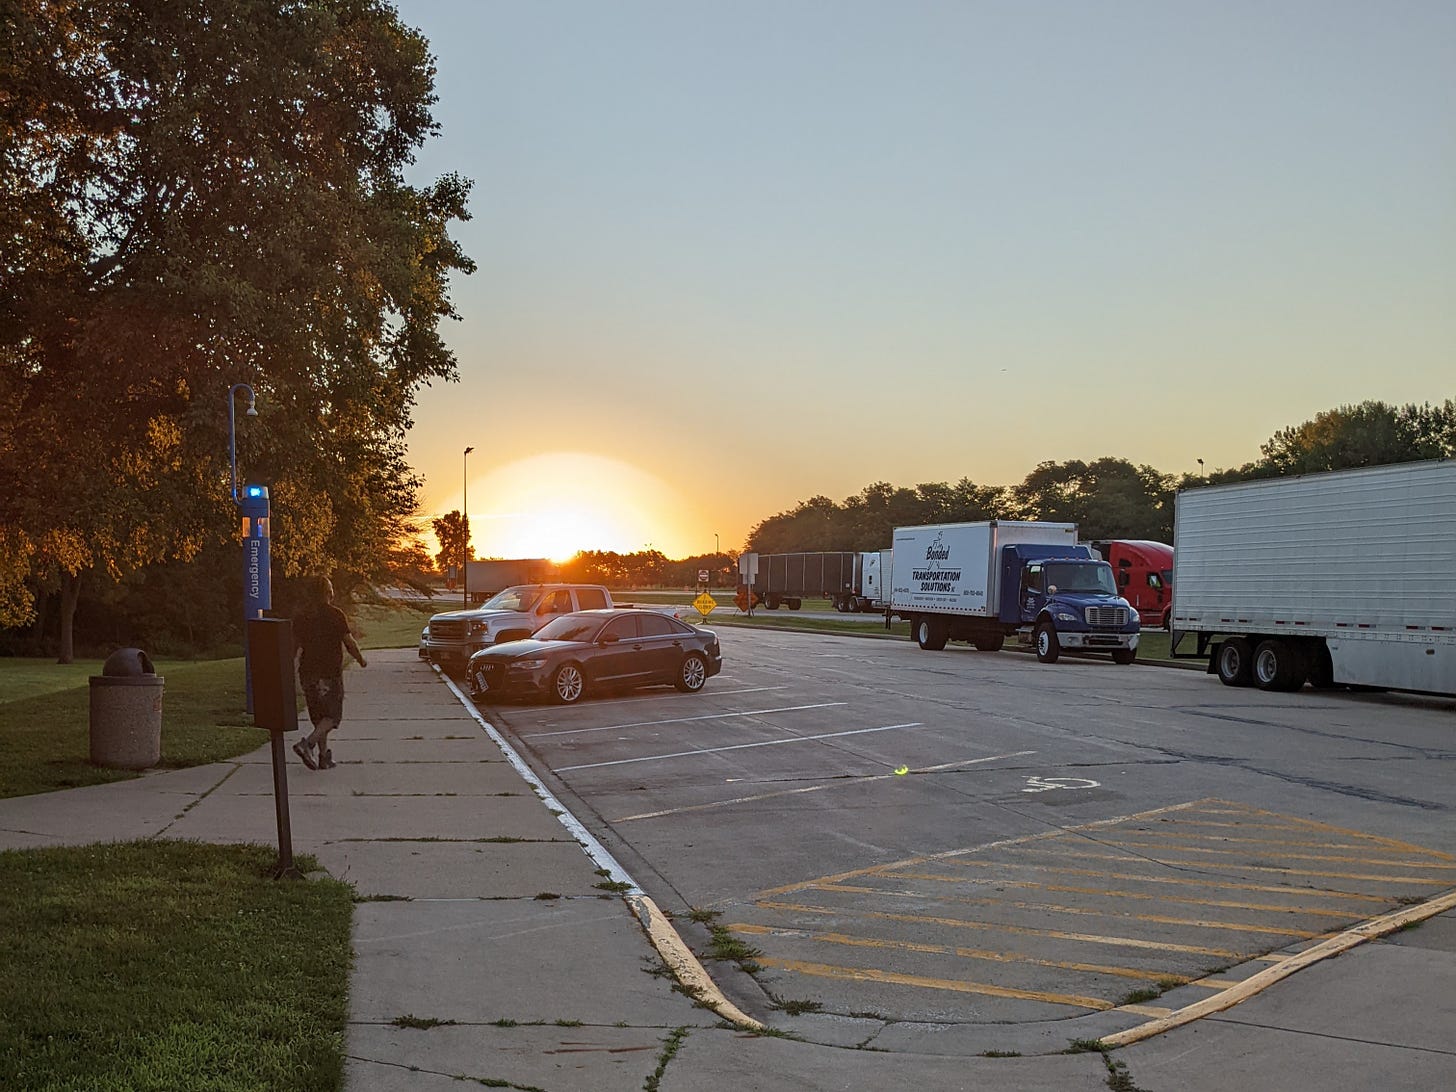 Photograph of the sun rising over a rest stop parking lot. There are several cars and semitrucks parked. The perspective is from someone standing on a sidewalk, which is partly visible. There are very large trees and and some green grass behind the sidewalk. The run is yellow-orange and the sky above it is very very light blue.